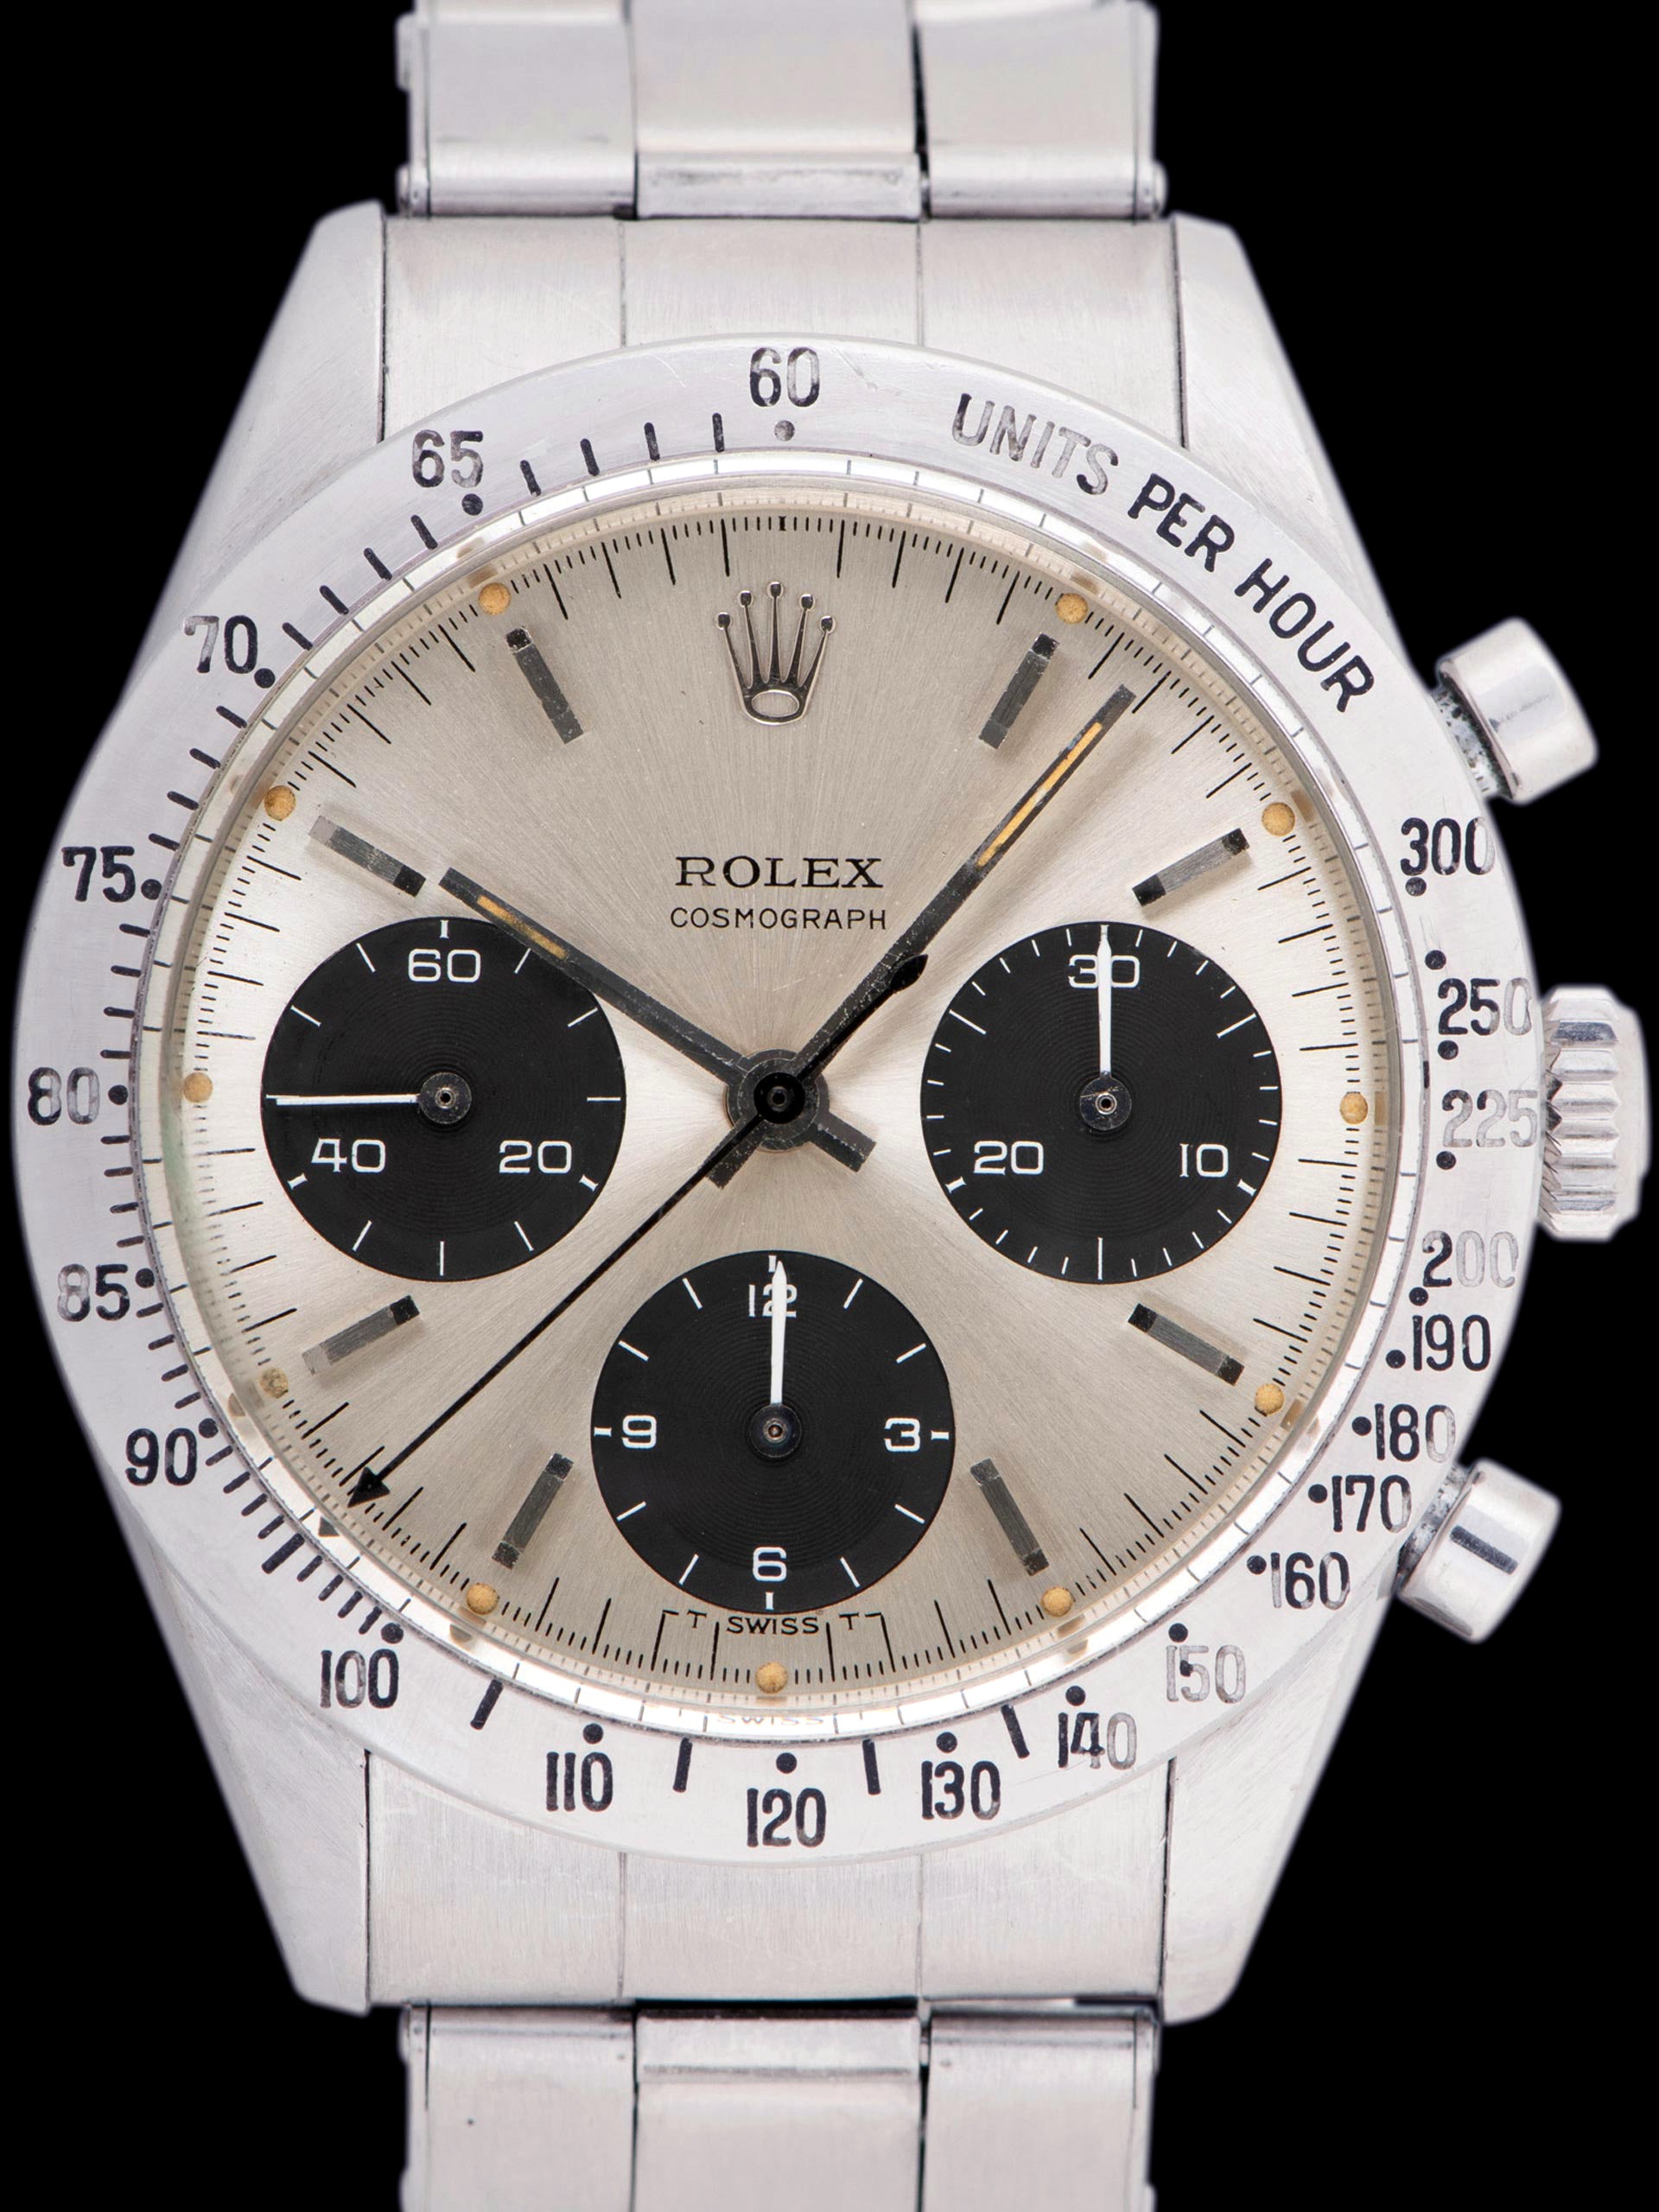 1964 Rolex Cosmograph Daytona (Ref. 6239) Silver Dial W/ Box & Papers